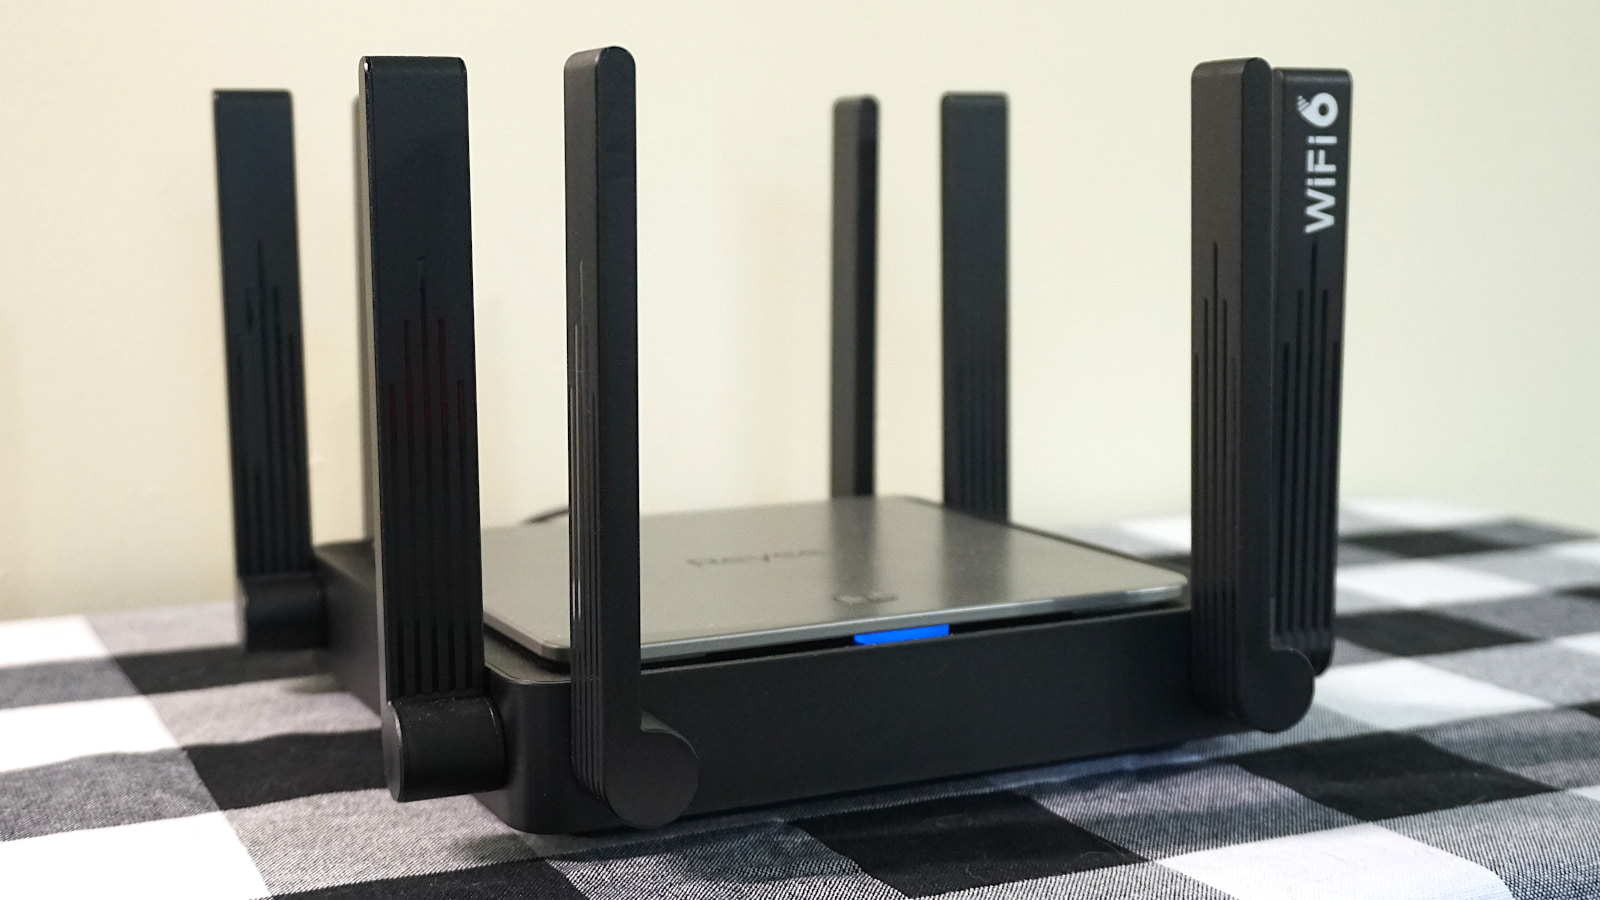 6 Things To Look For When Picking A Wifi Router For Your Home